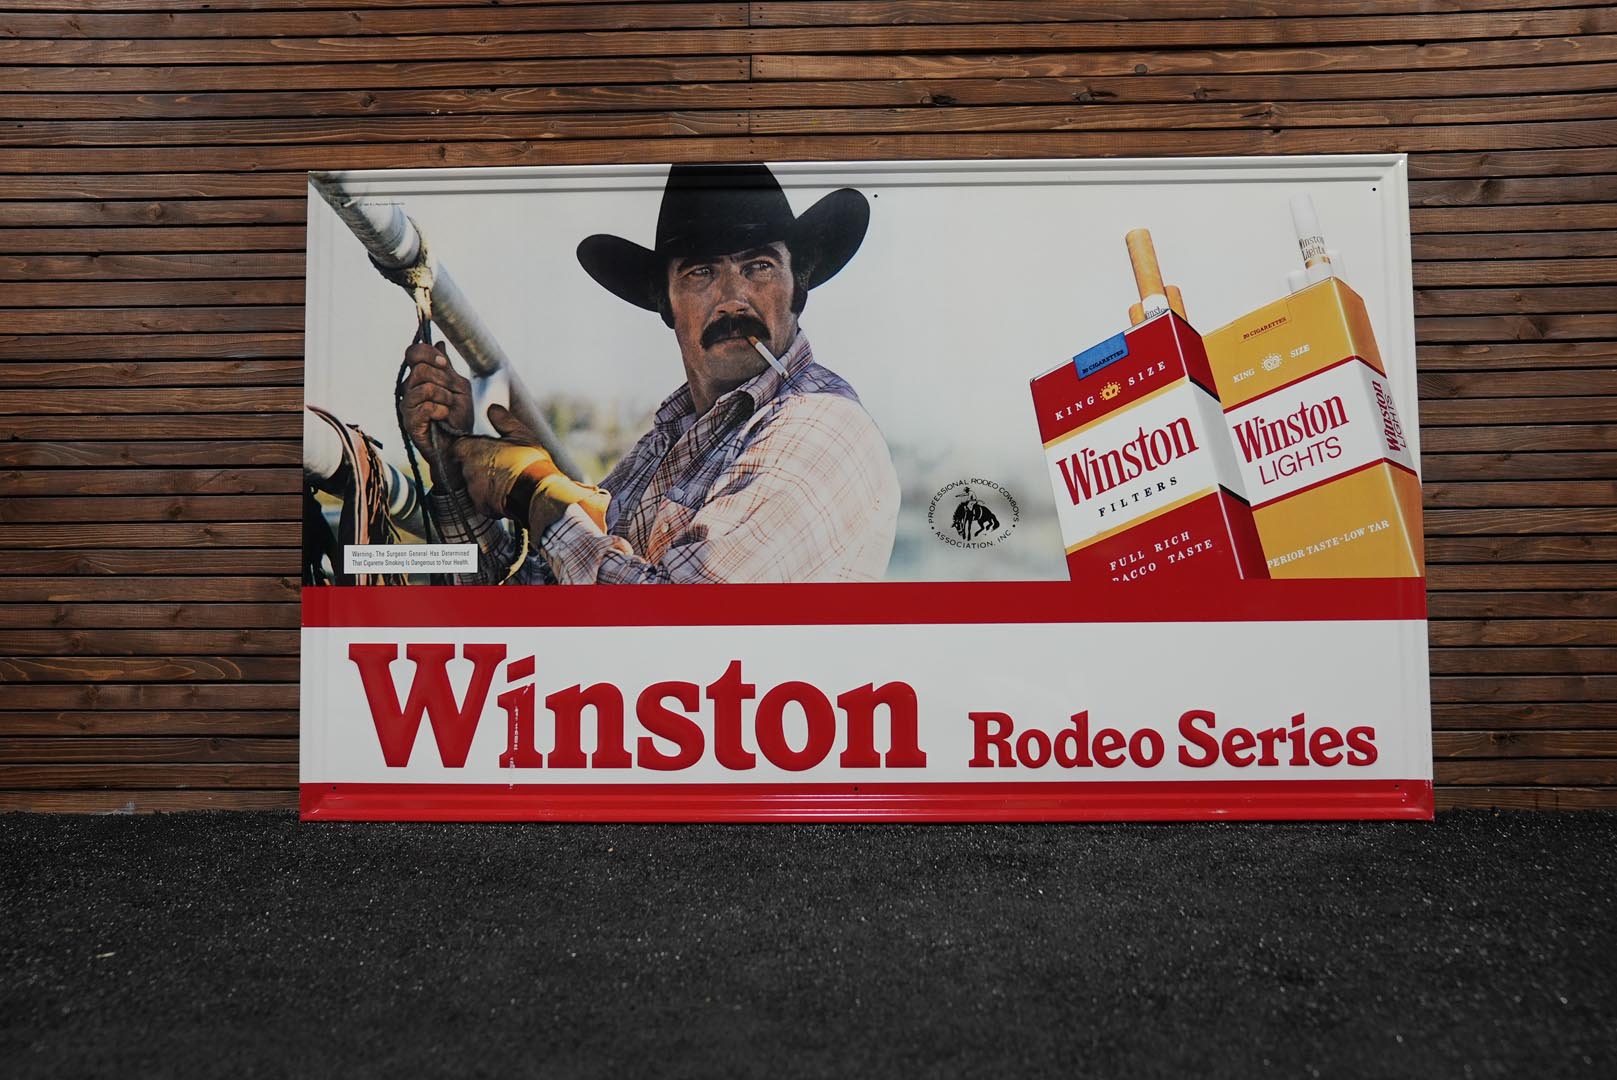  Winston Rodeo Series Large Lit hographed Tin Sign 